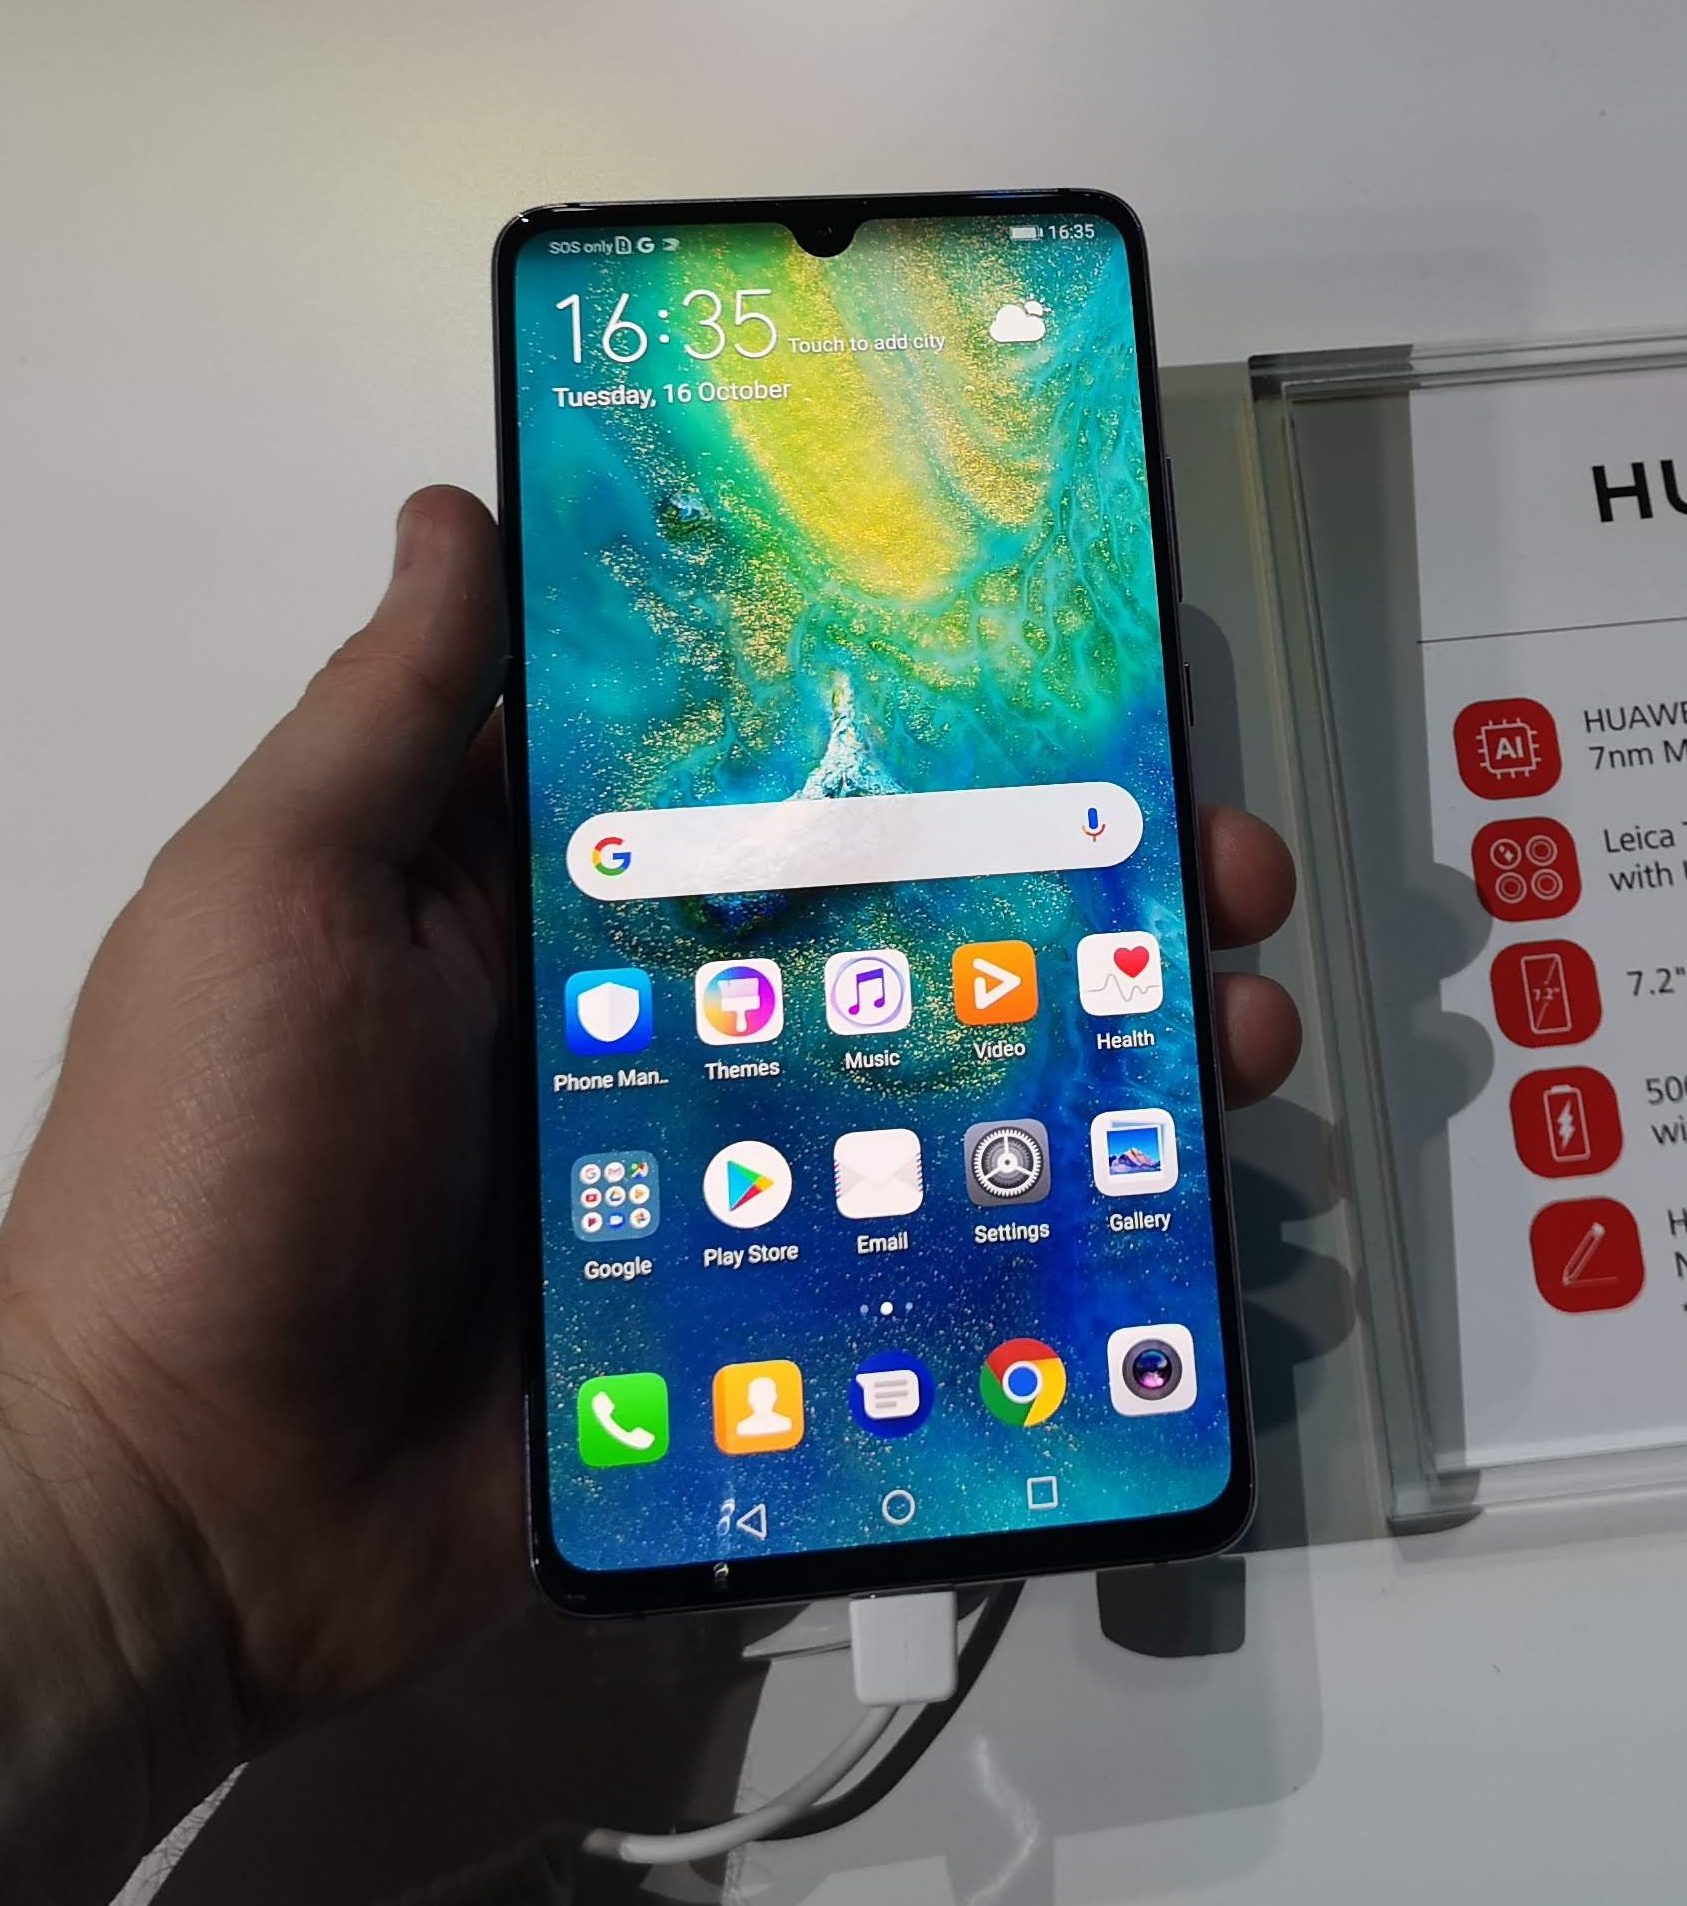 Huawei Mate 20 Pro: Release Date, Price and Specifications - Coolsmartphone